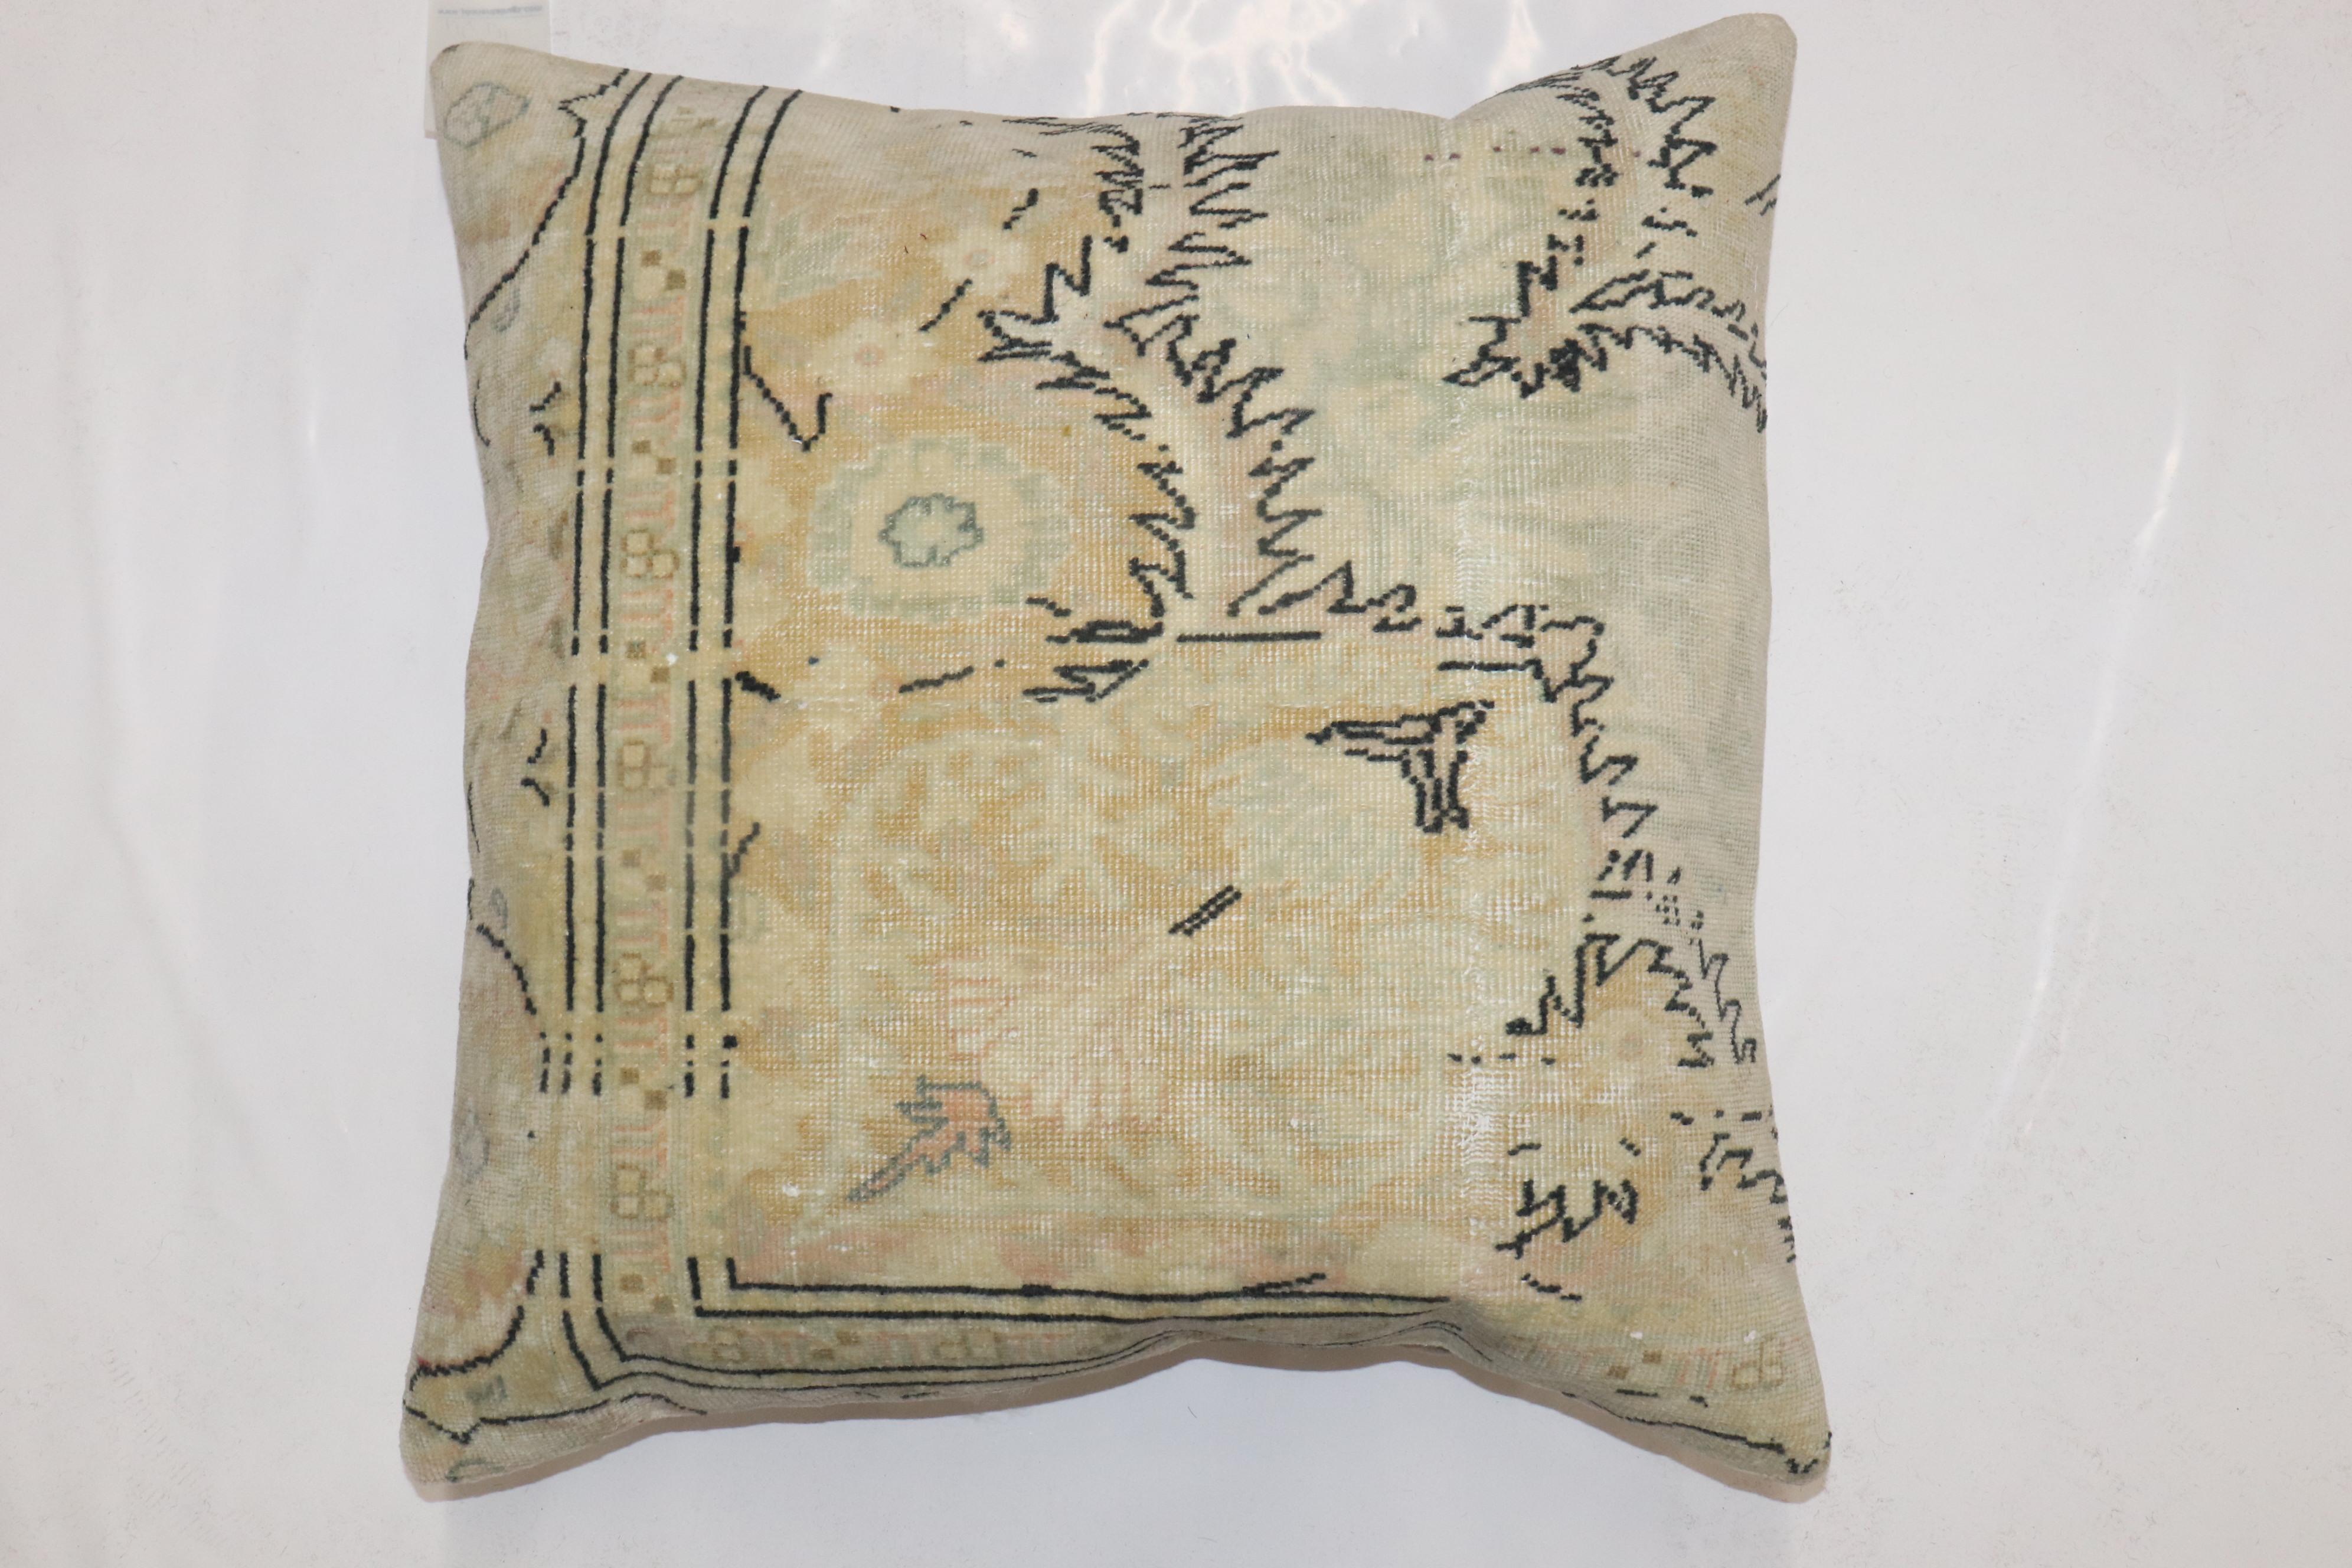 Pillow made from a mid-20th century Turkish Keysari rug in a bolster Size. zipper closure and polyfill insert provided

Measures: 23'' x 23''.